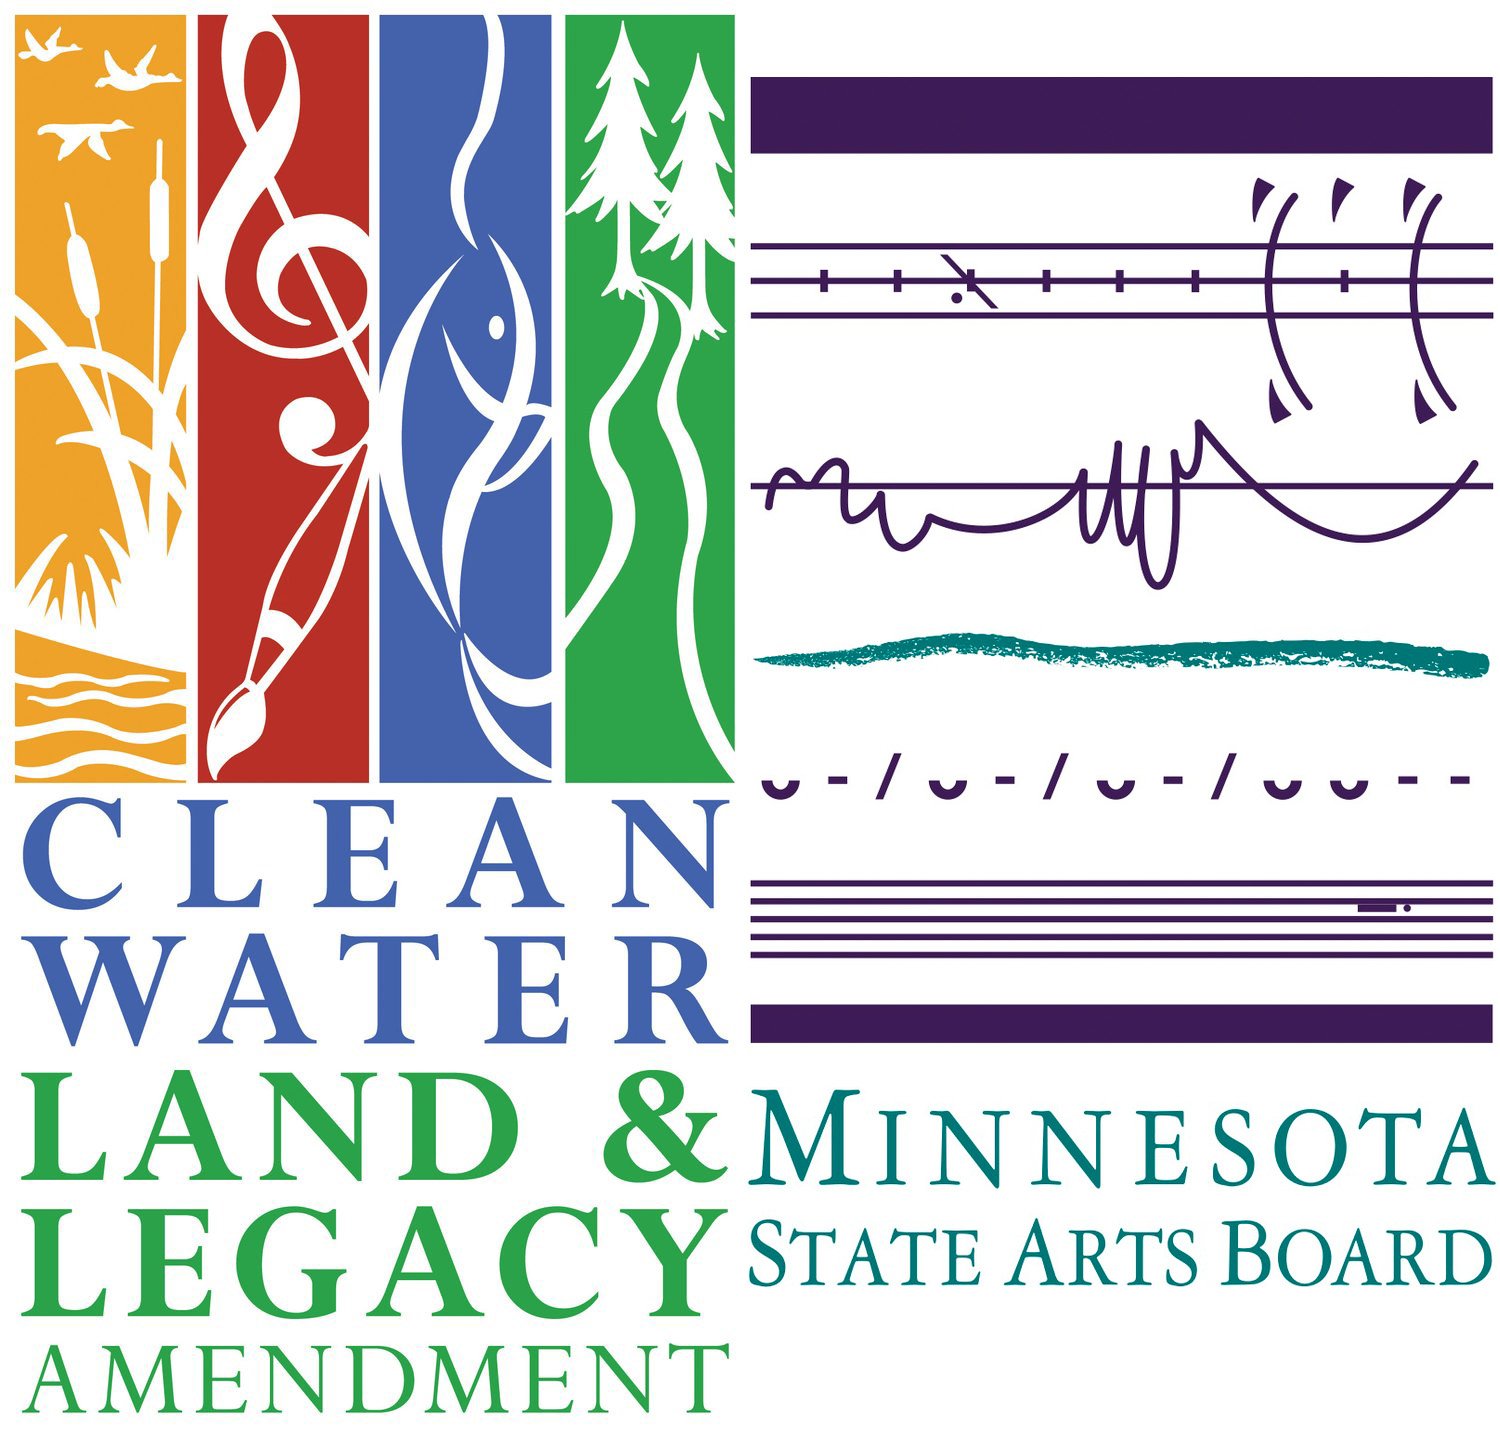  Adam Swanson is a fiscal year 2021 recipient of a Creative Support for Individuals grant from the Minnesota State Arts Board. This activity is made possible by the voters of Minnesota through a grant from the Minnesota State Arts Board, thanks to a 